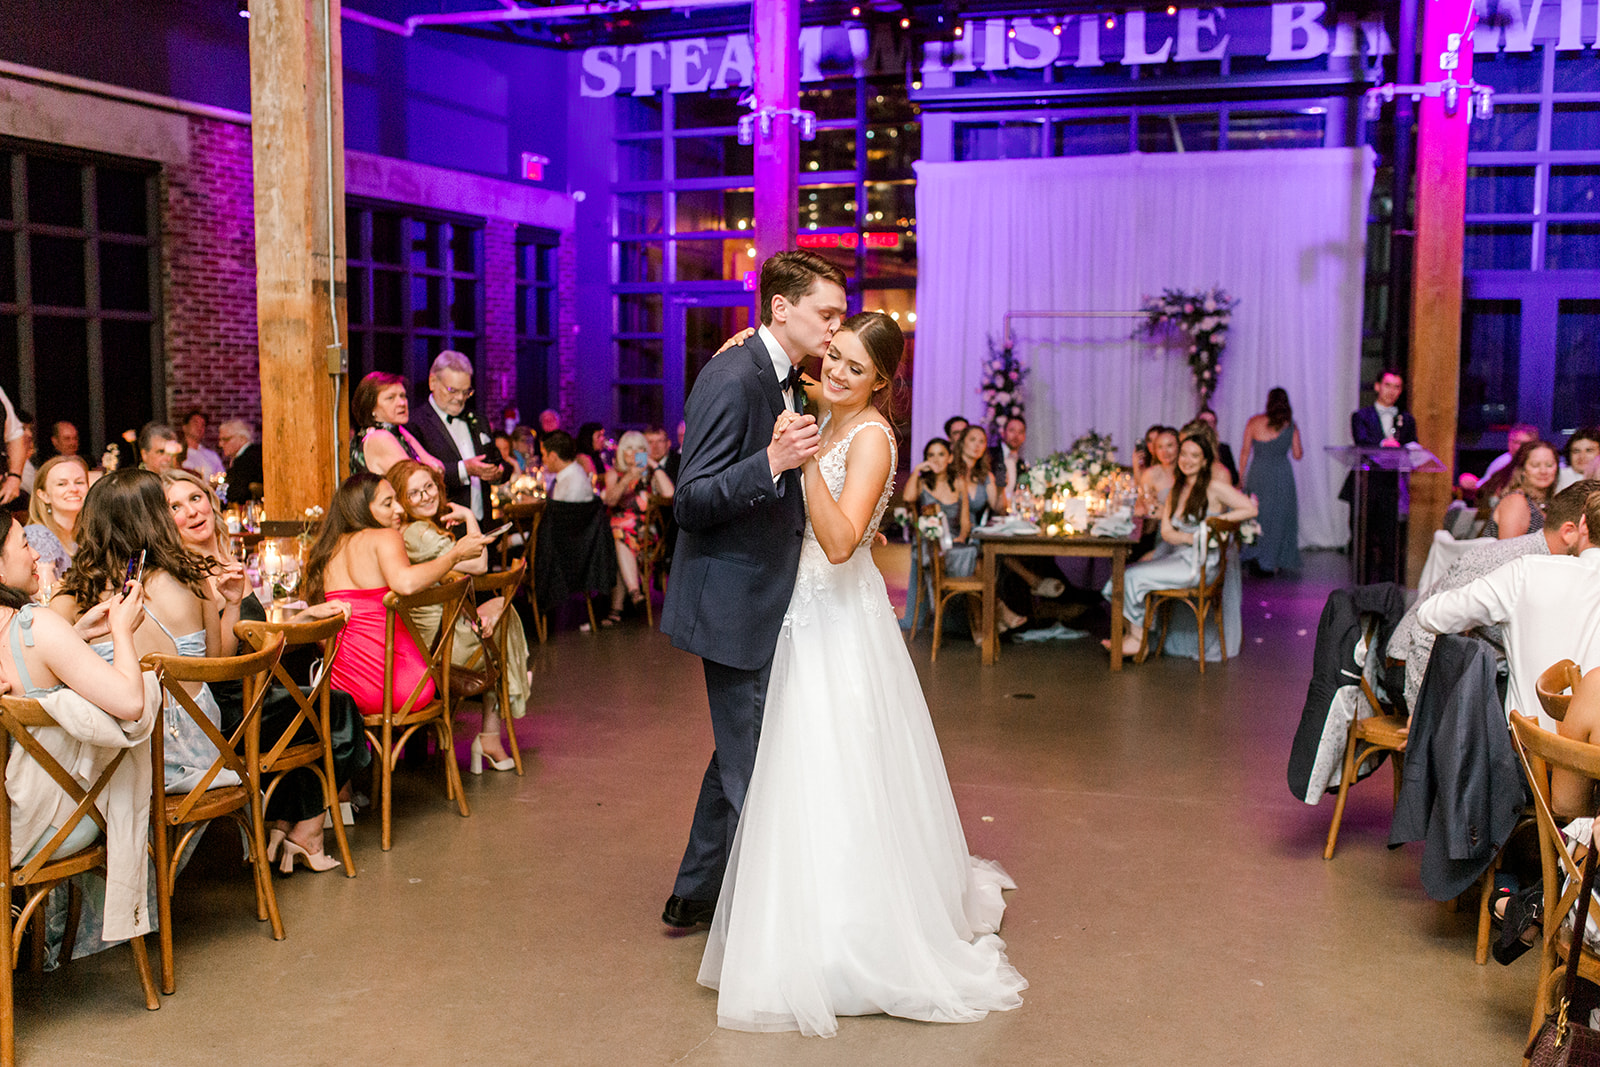 Couple embraces during their first dance at Steam Whistle Brewing, Pilsner Hall